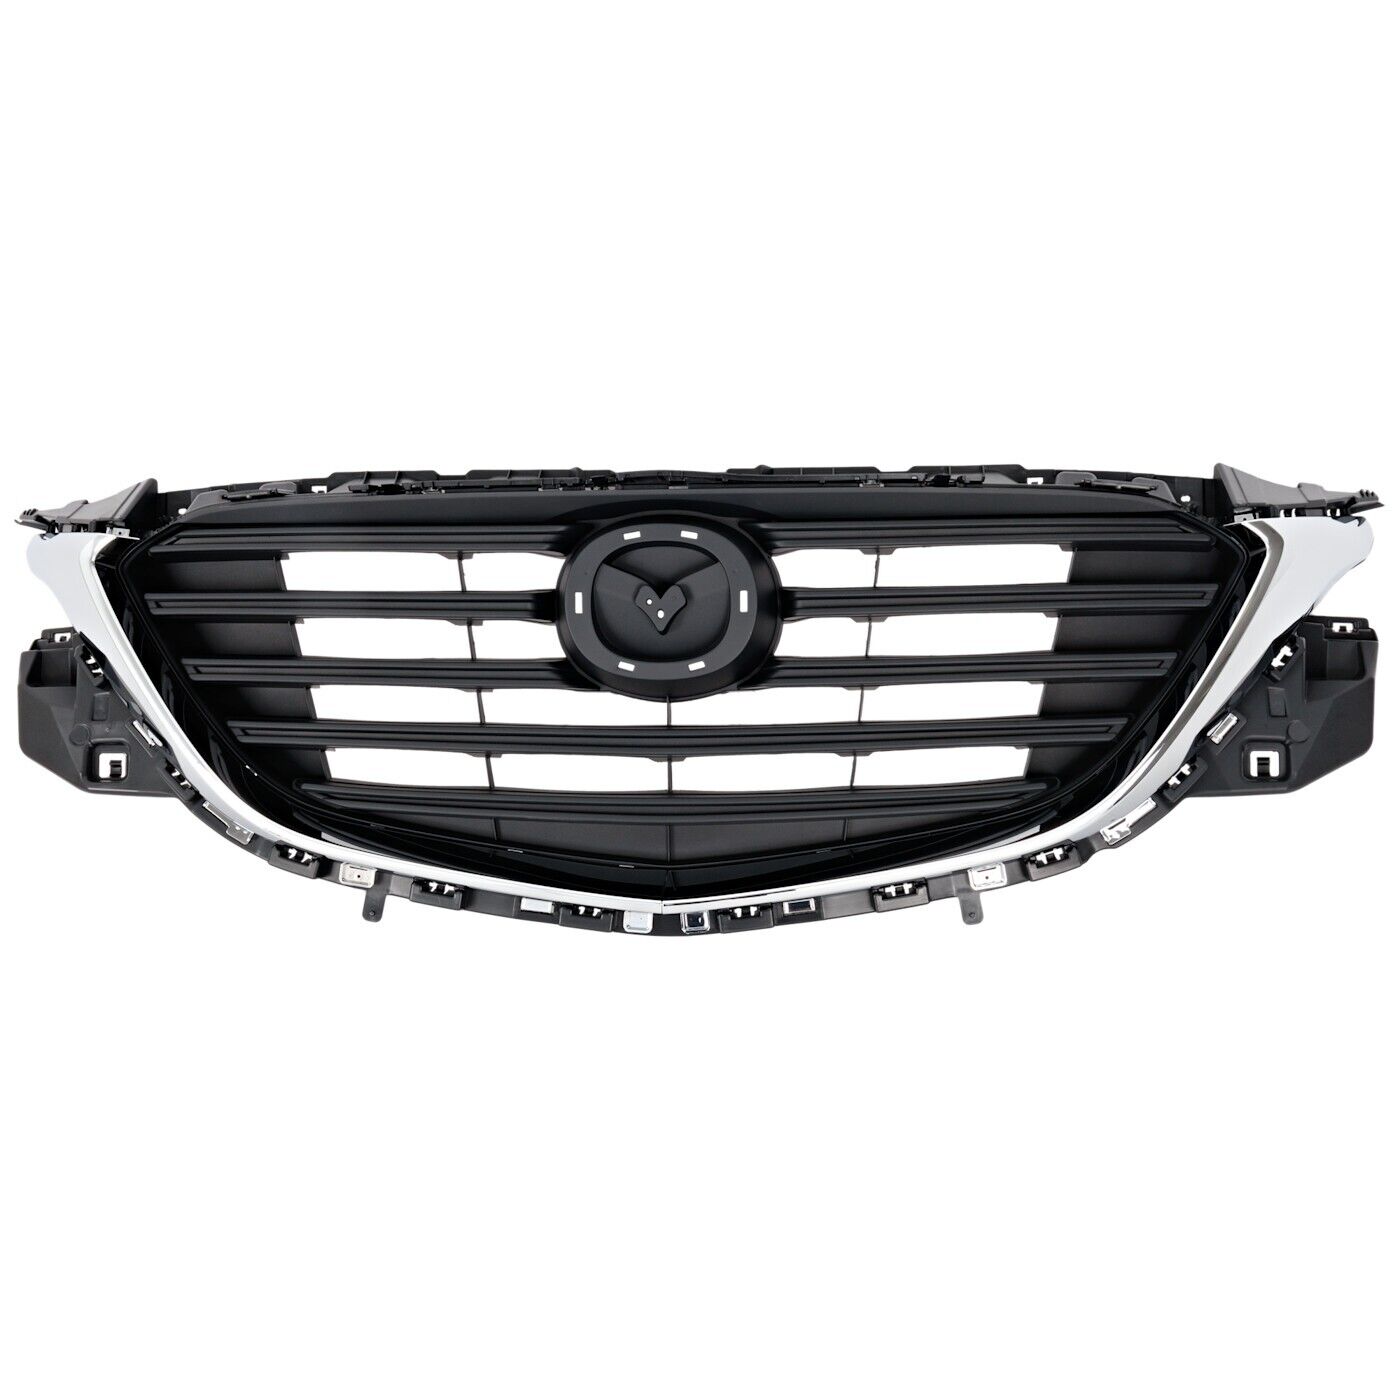 Grille Grill  TK4850710G for Mazda CX-9 2016-2020